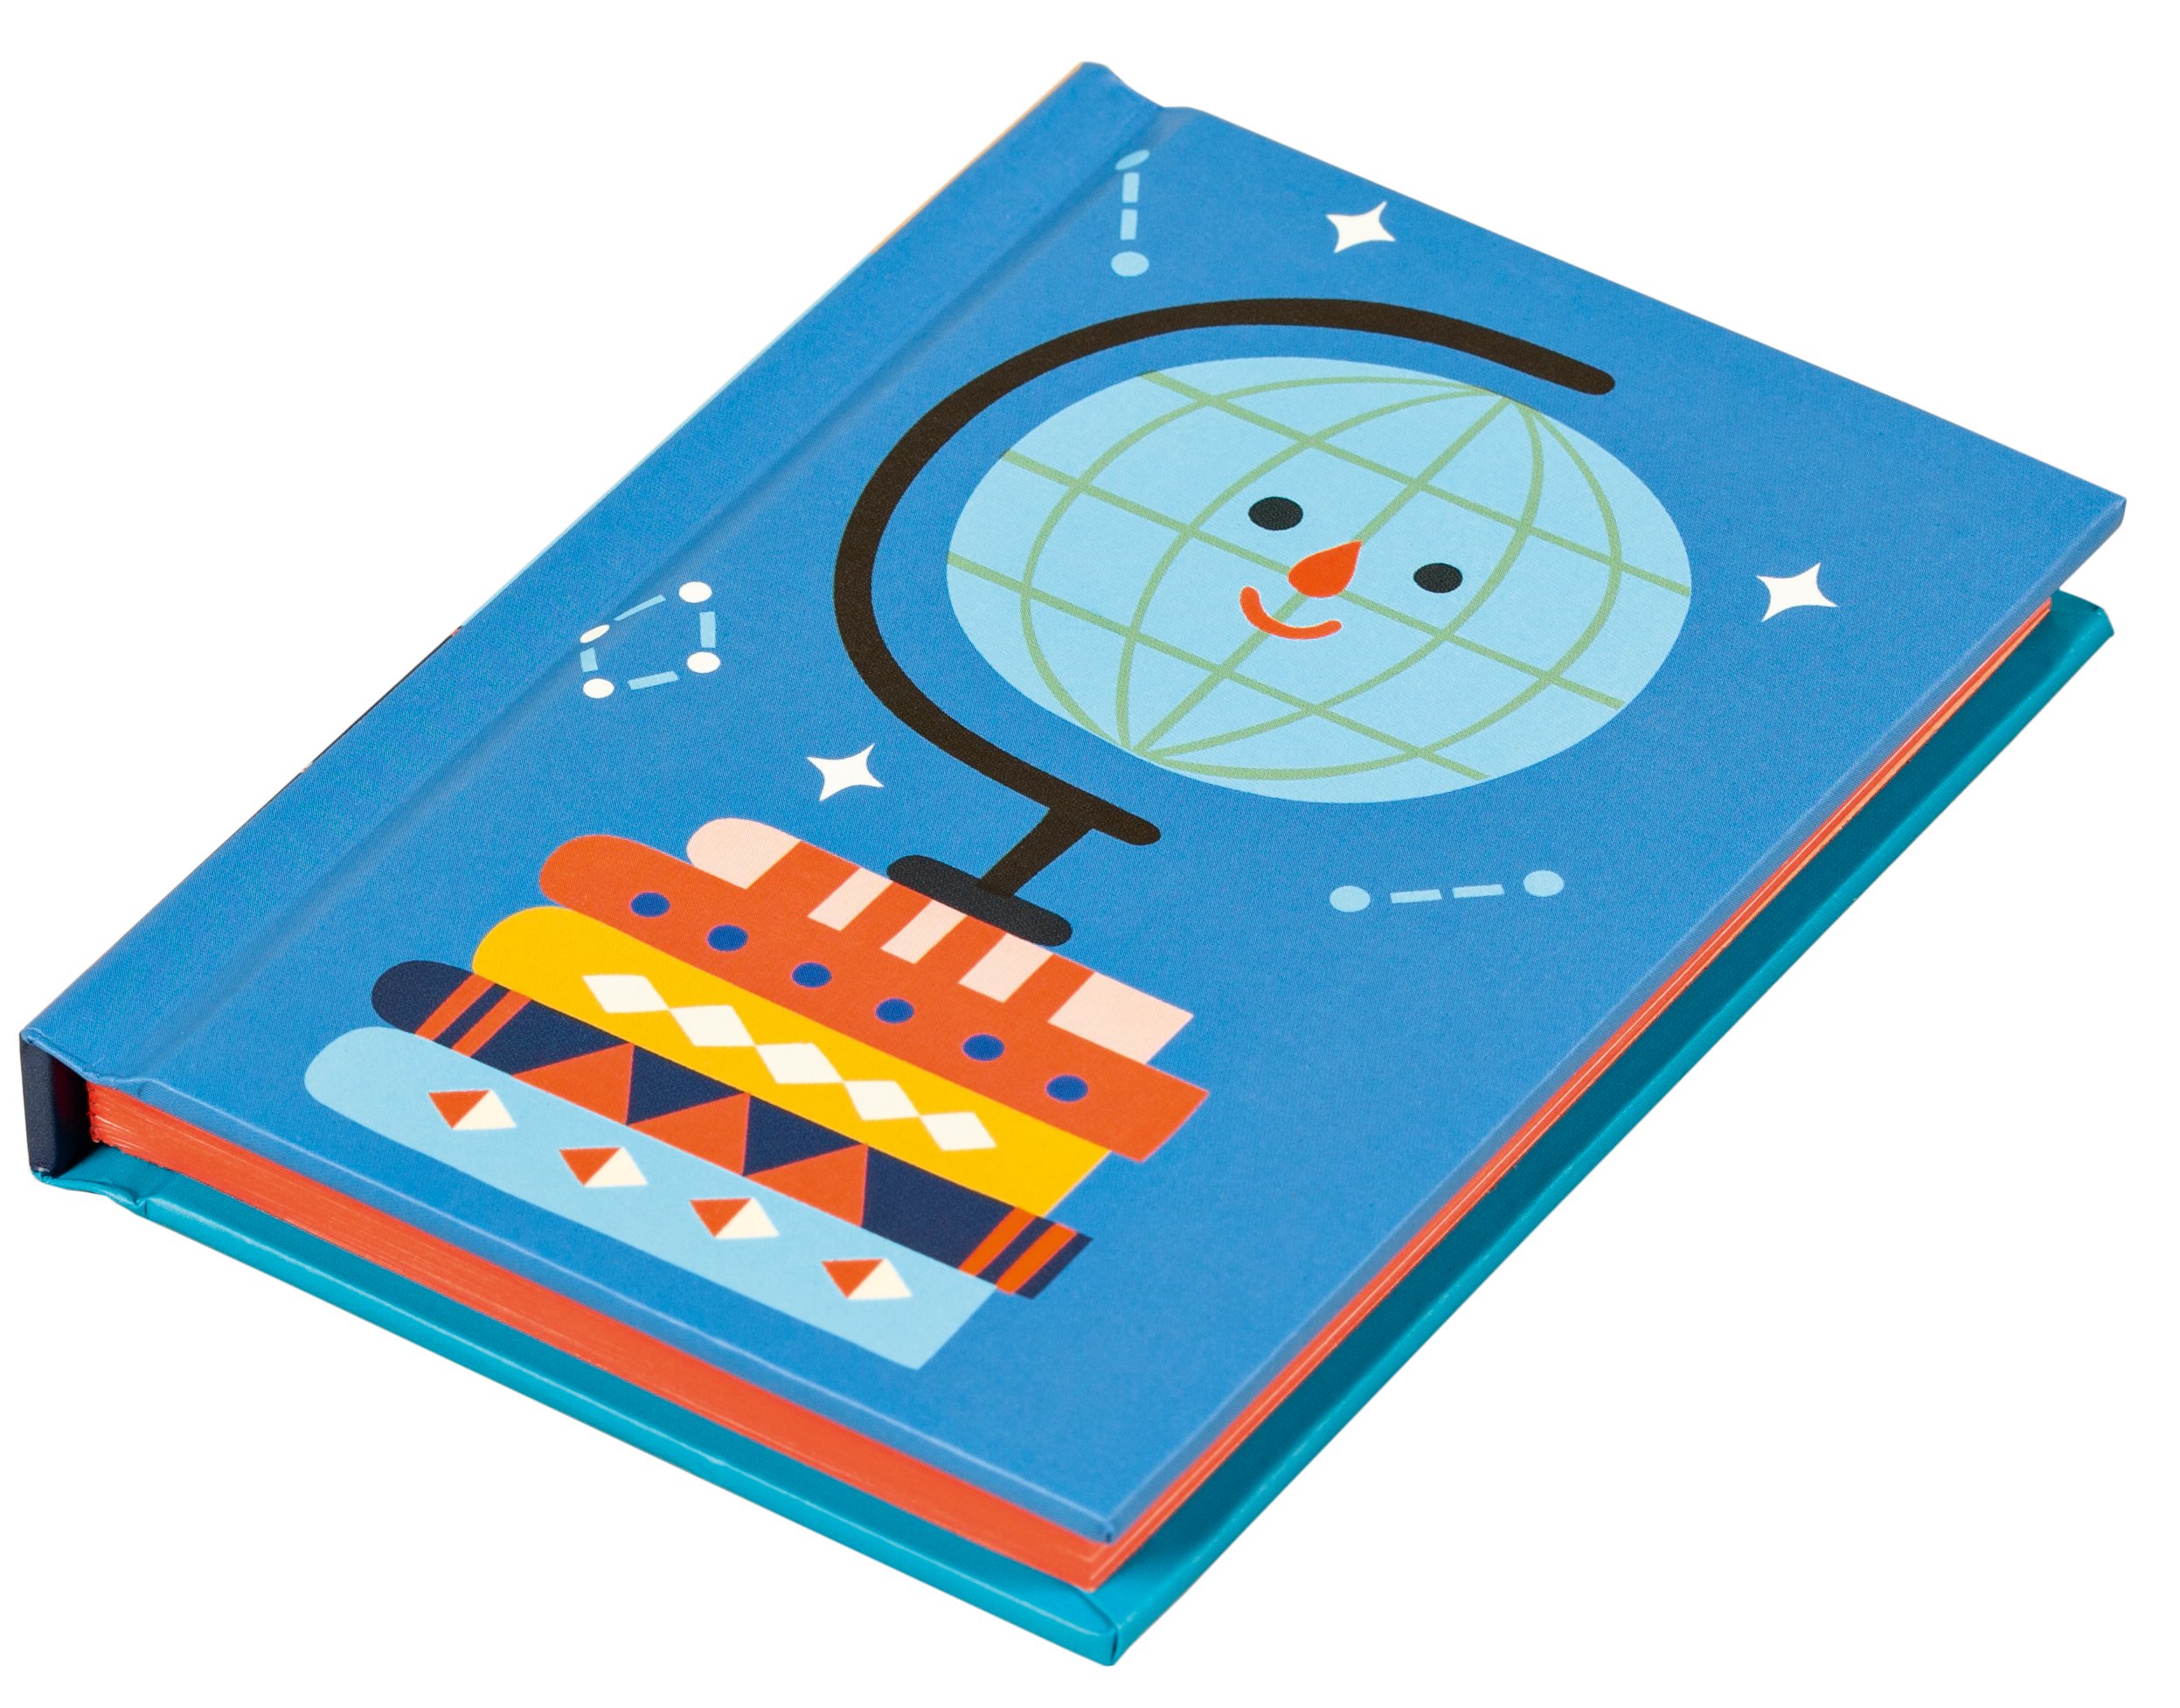 Blue cover featuring a colour graphic illustration of a smiley faced world globe sitting on a stack of books with white stars above